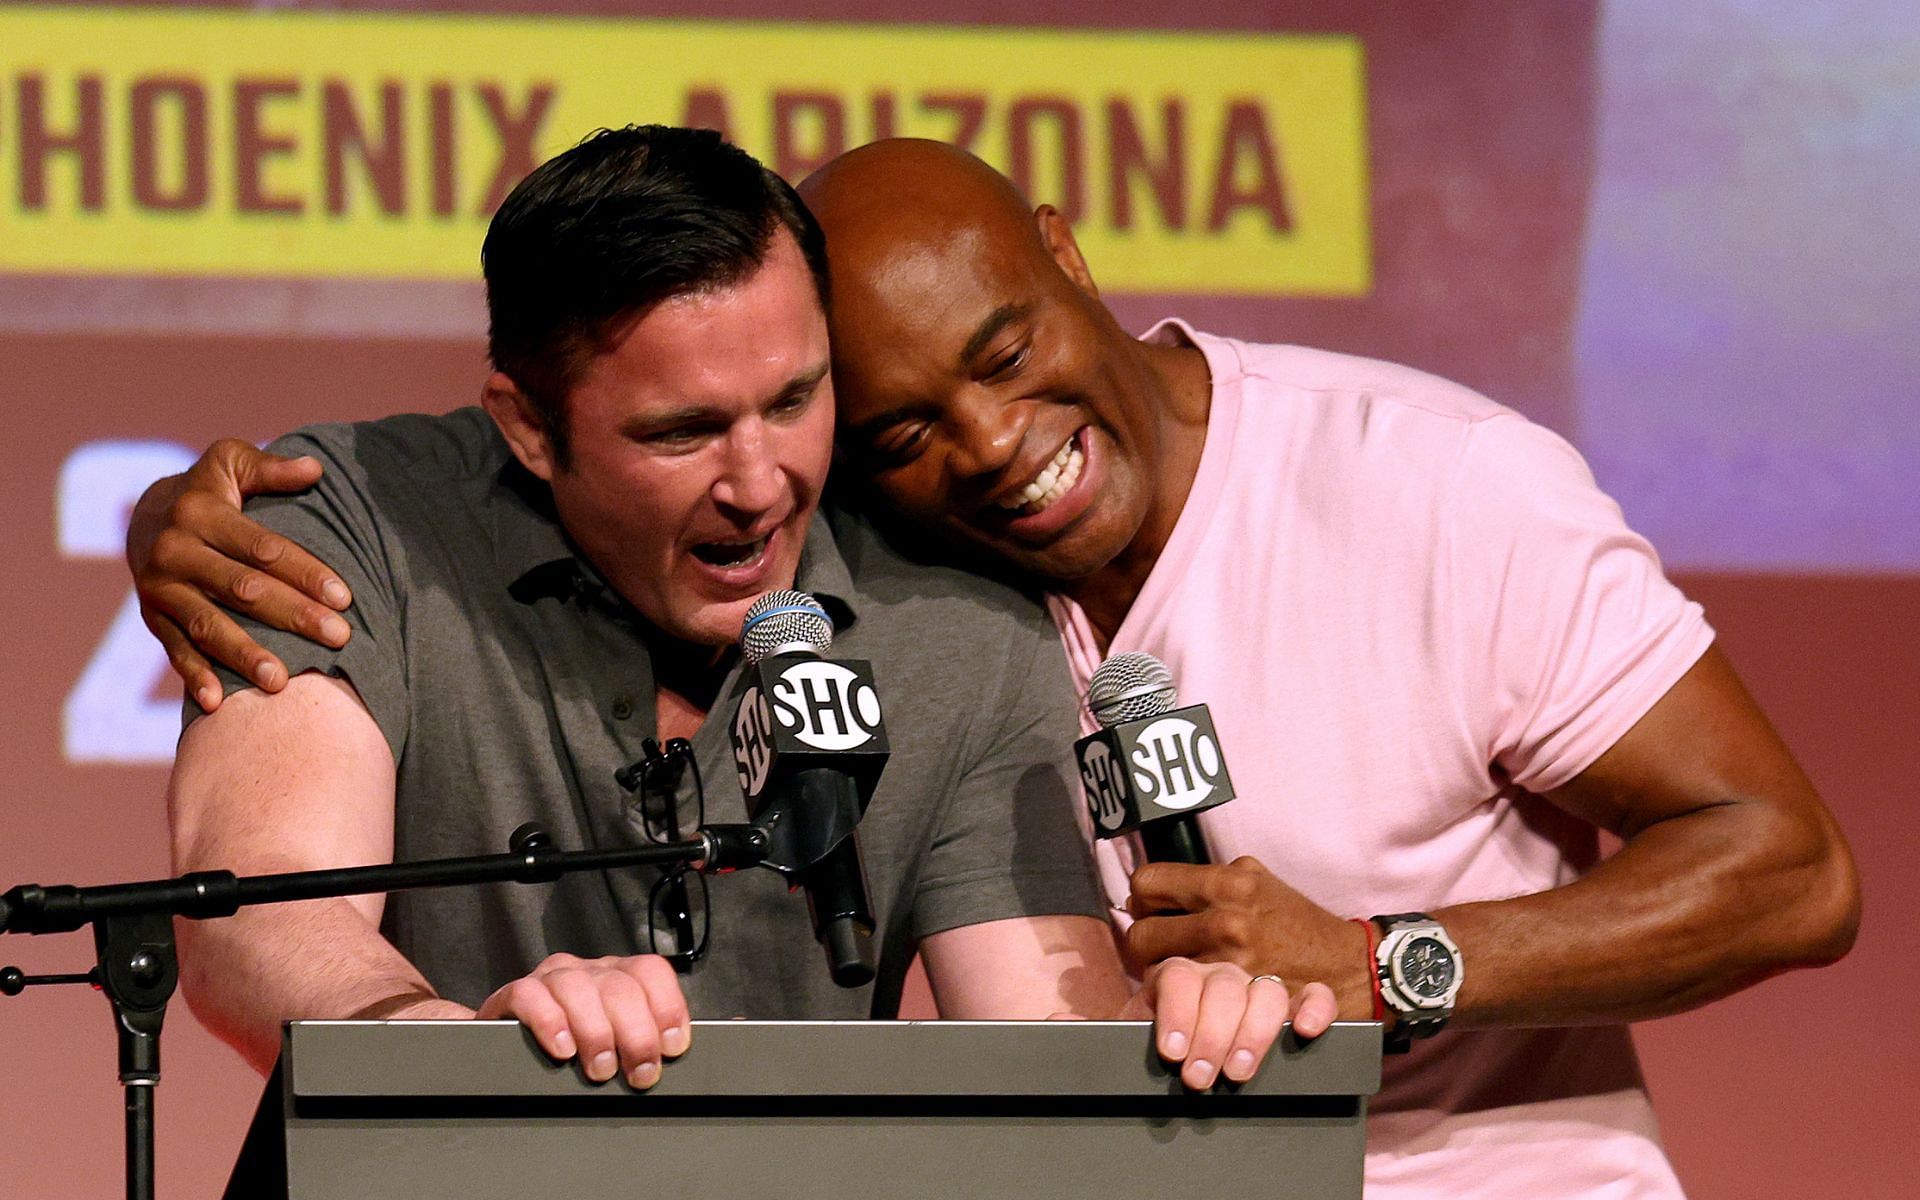 Chael Sonnen and Anderson Silva [Image courtesy: Getty]